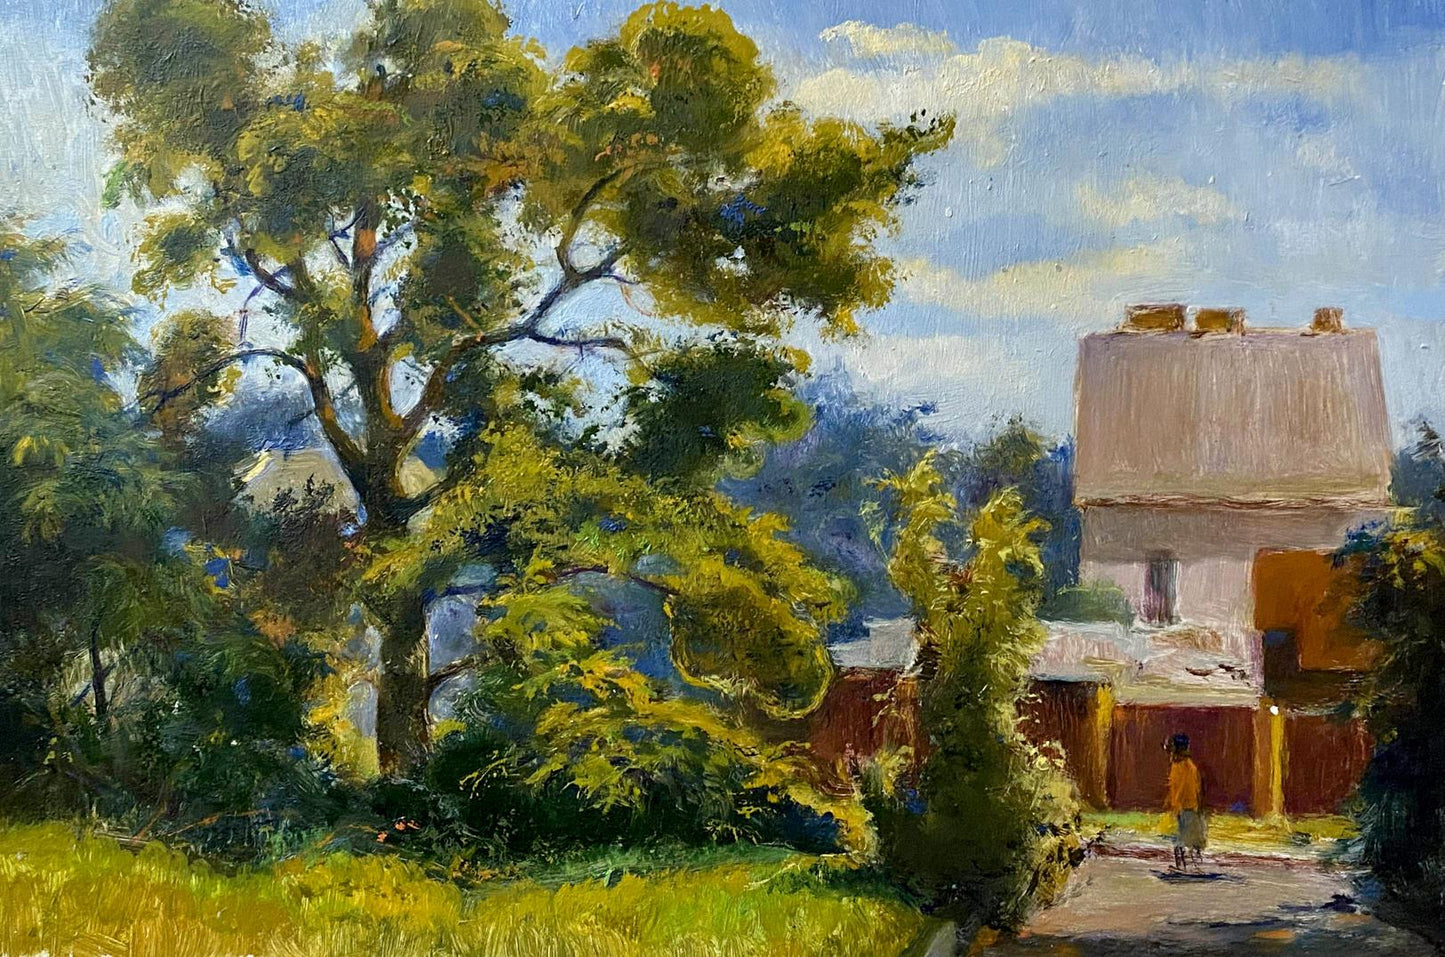 Oil painting In the sun buy